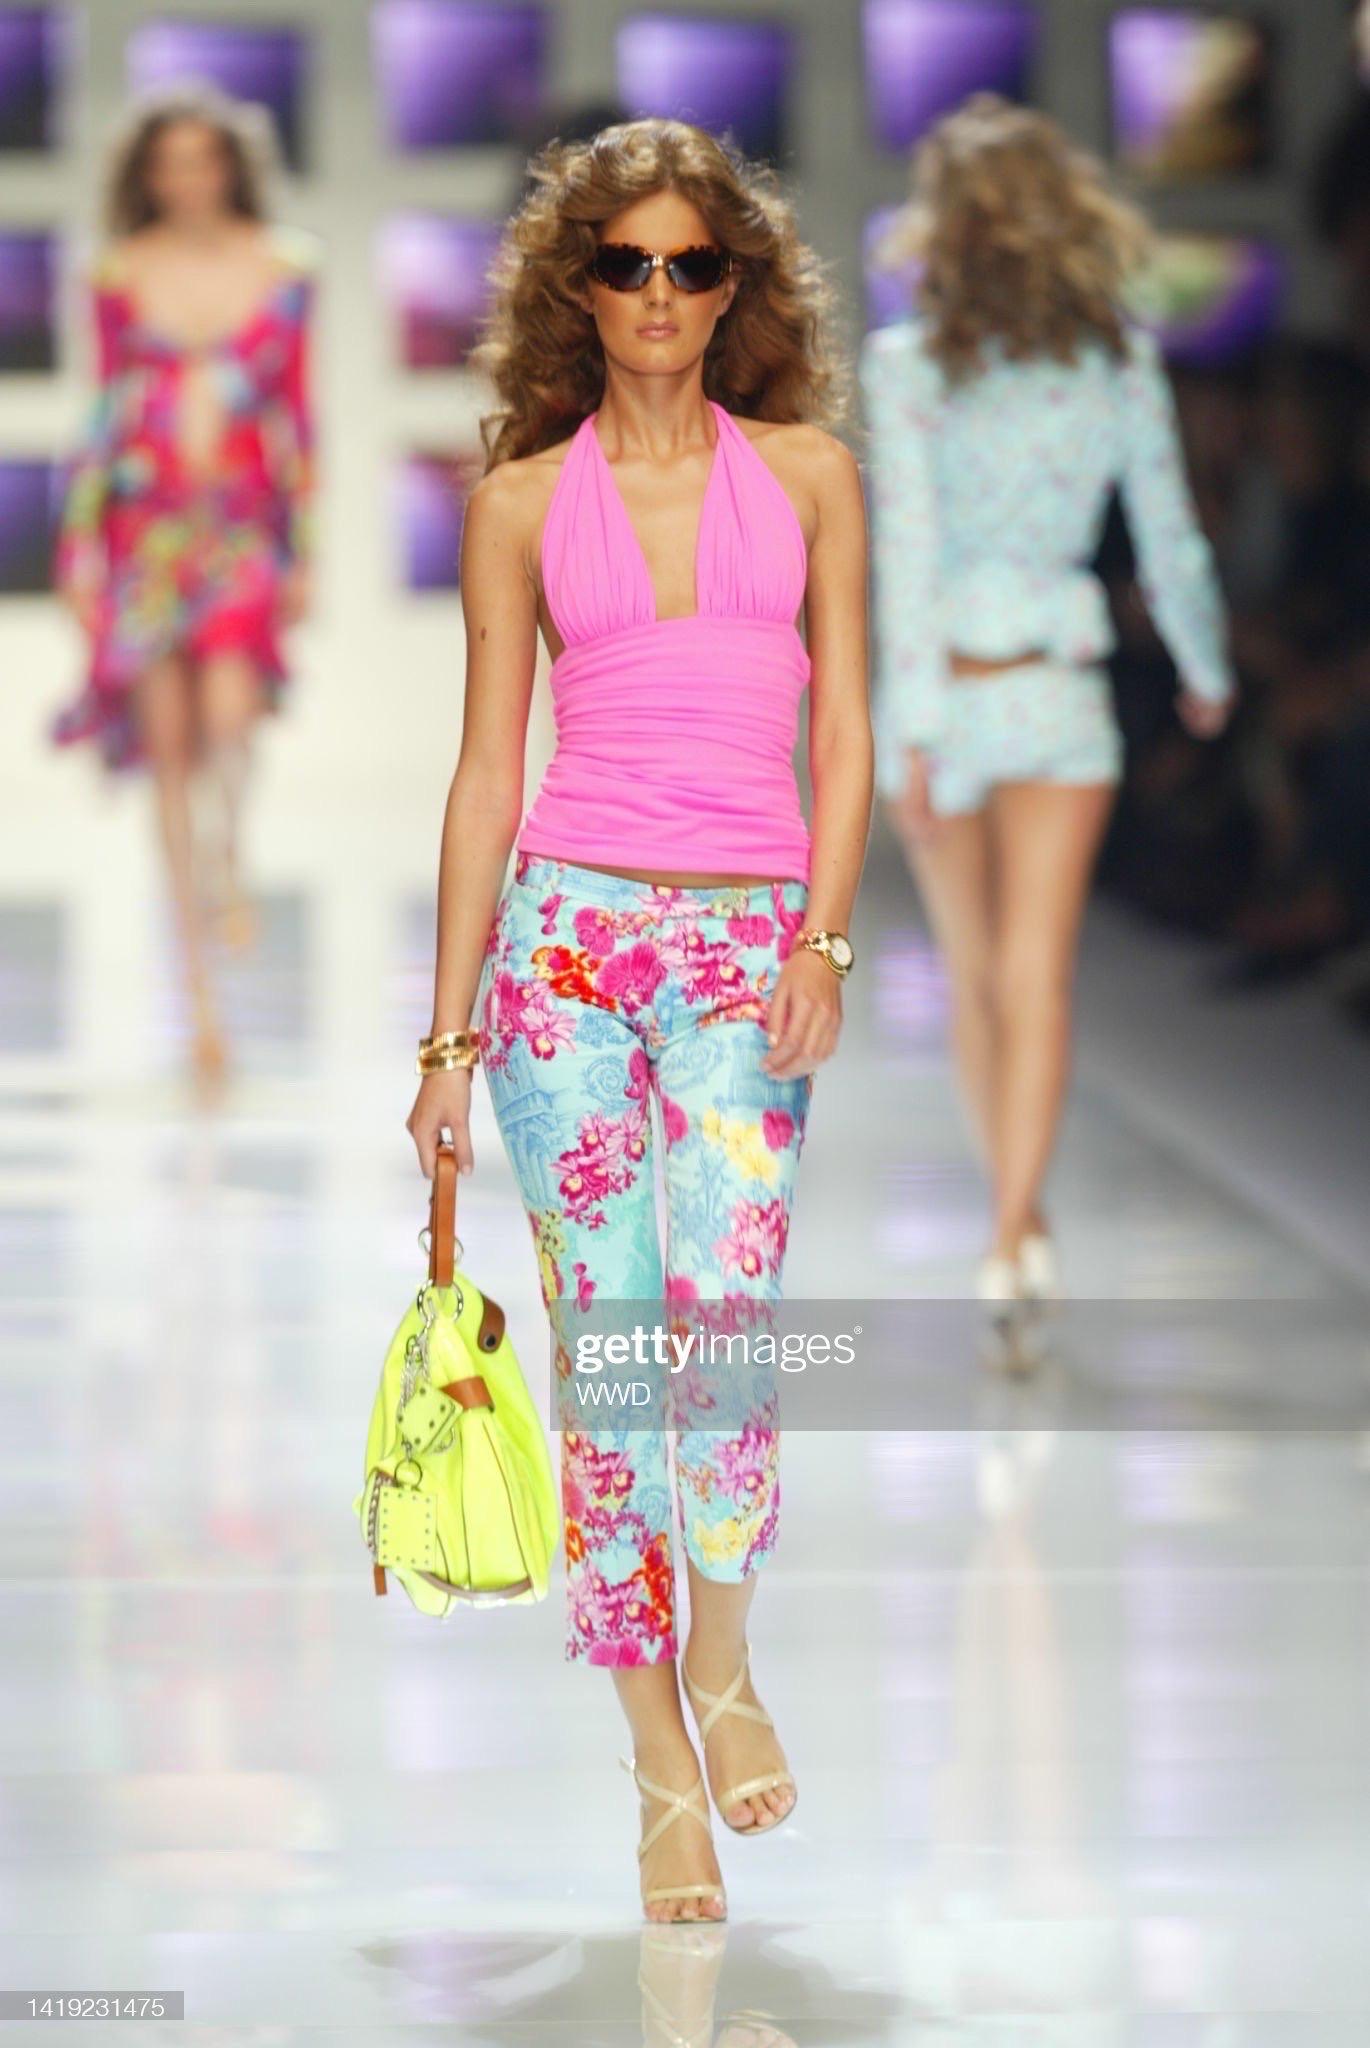 As seen on the runway, highly sought after orchid print with Donatella’s portrait.

Stretch cotton fabric. 

Size IT 42, fits like 6/8 US.

Pristine archival condition. 